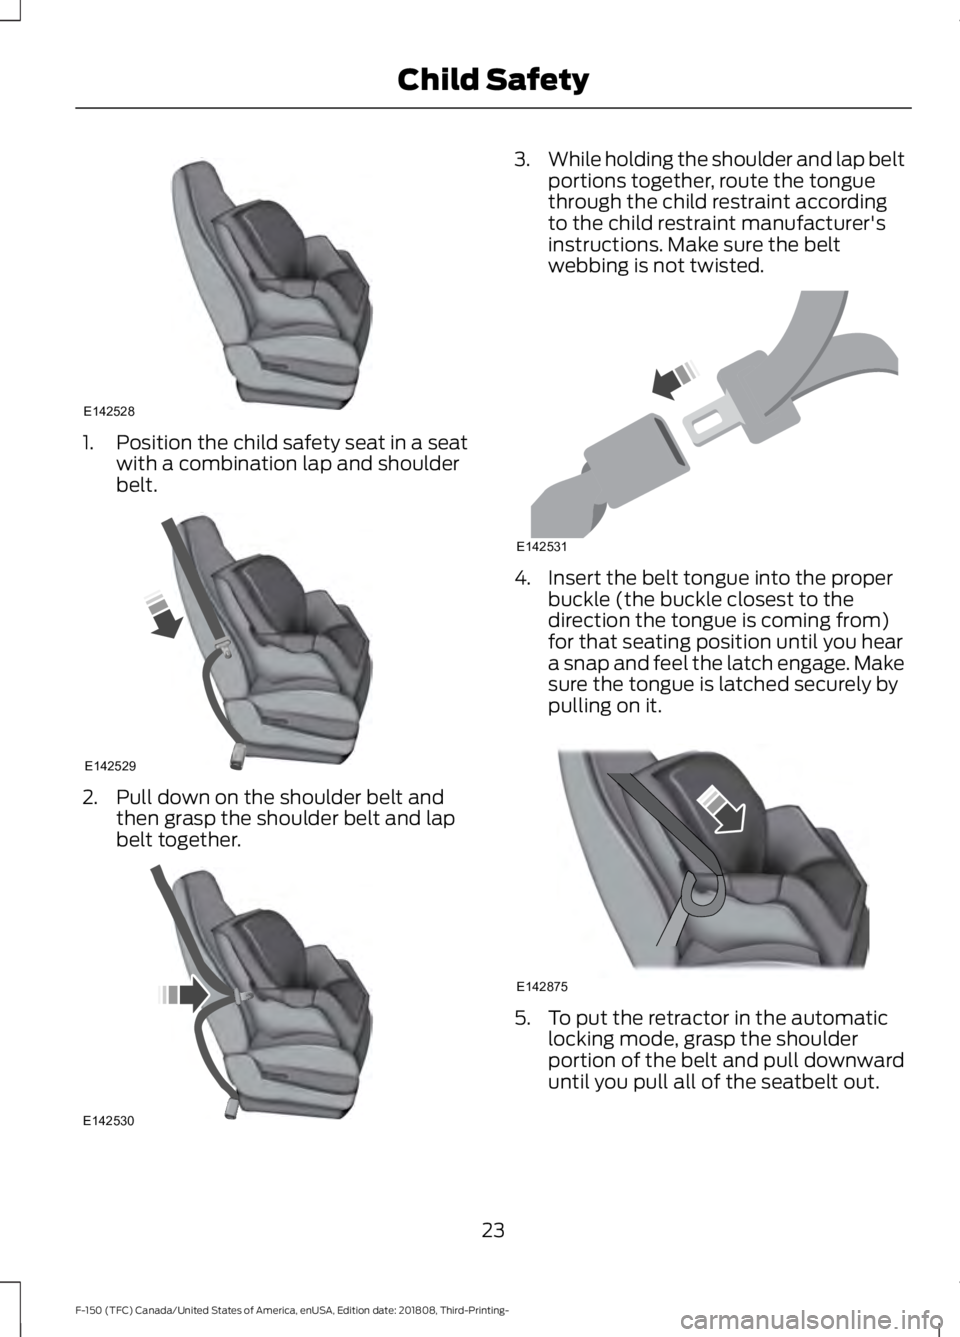 FORD F-150 2019  Owners Manual 1. Position the child safety seat in a seat
with a combination lap and shoulder
belt. 2. Pull down on the shoulder belt and
then grasp the shoulder belt and lap
belt together. 3.
While holding the sho